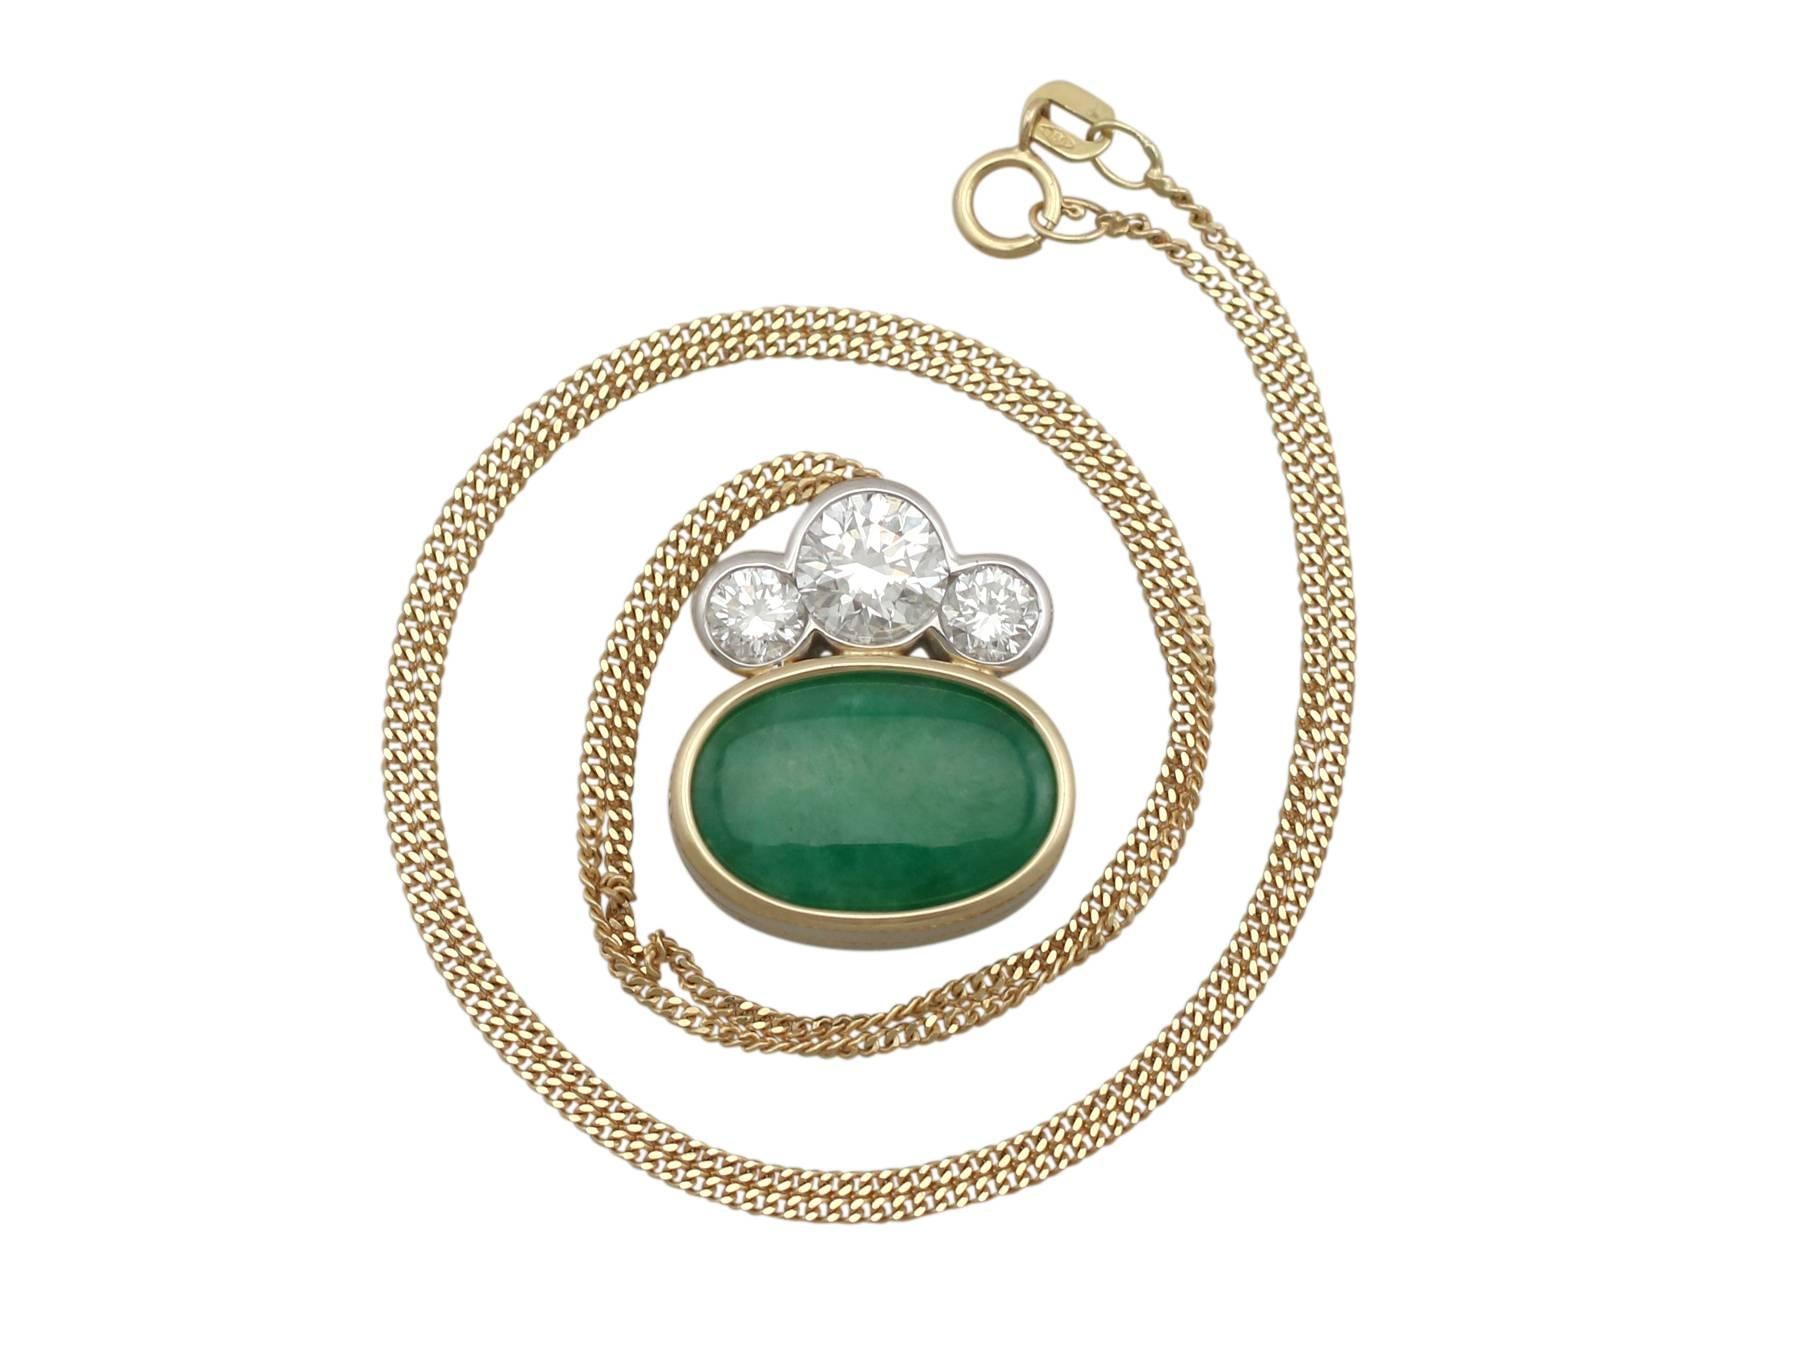 A stunning 4.05 carat nephrite jade and 1.82 carat diamond, 18 karat yellow gold and 18 karat white gold set pendant; part of our diverse gemstone jewelry collections

This stunning, fine and impressive vintage jade pendant has been crafted in 18k